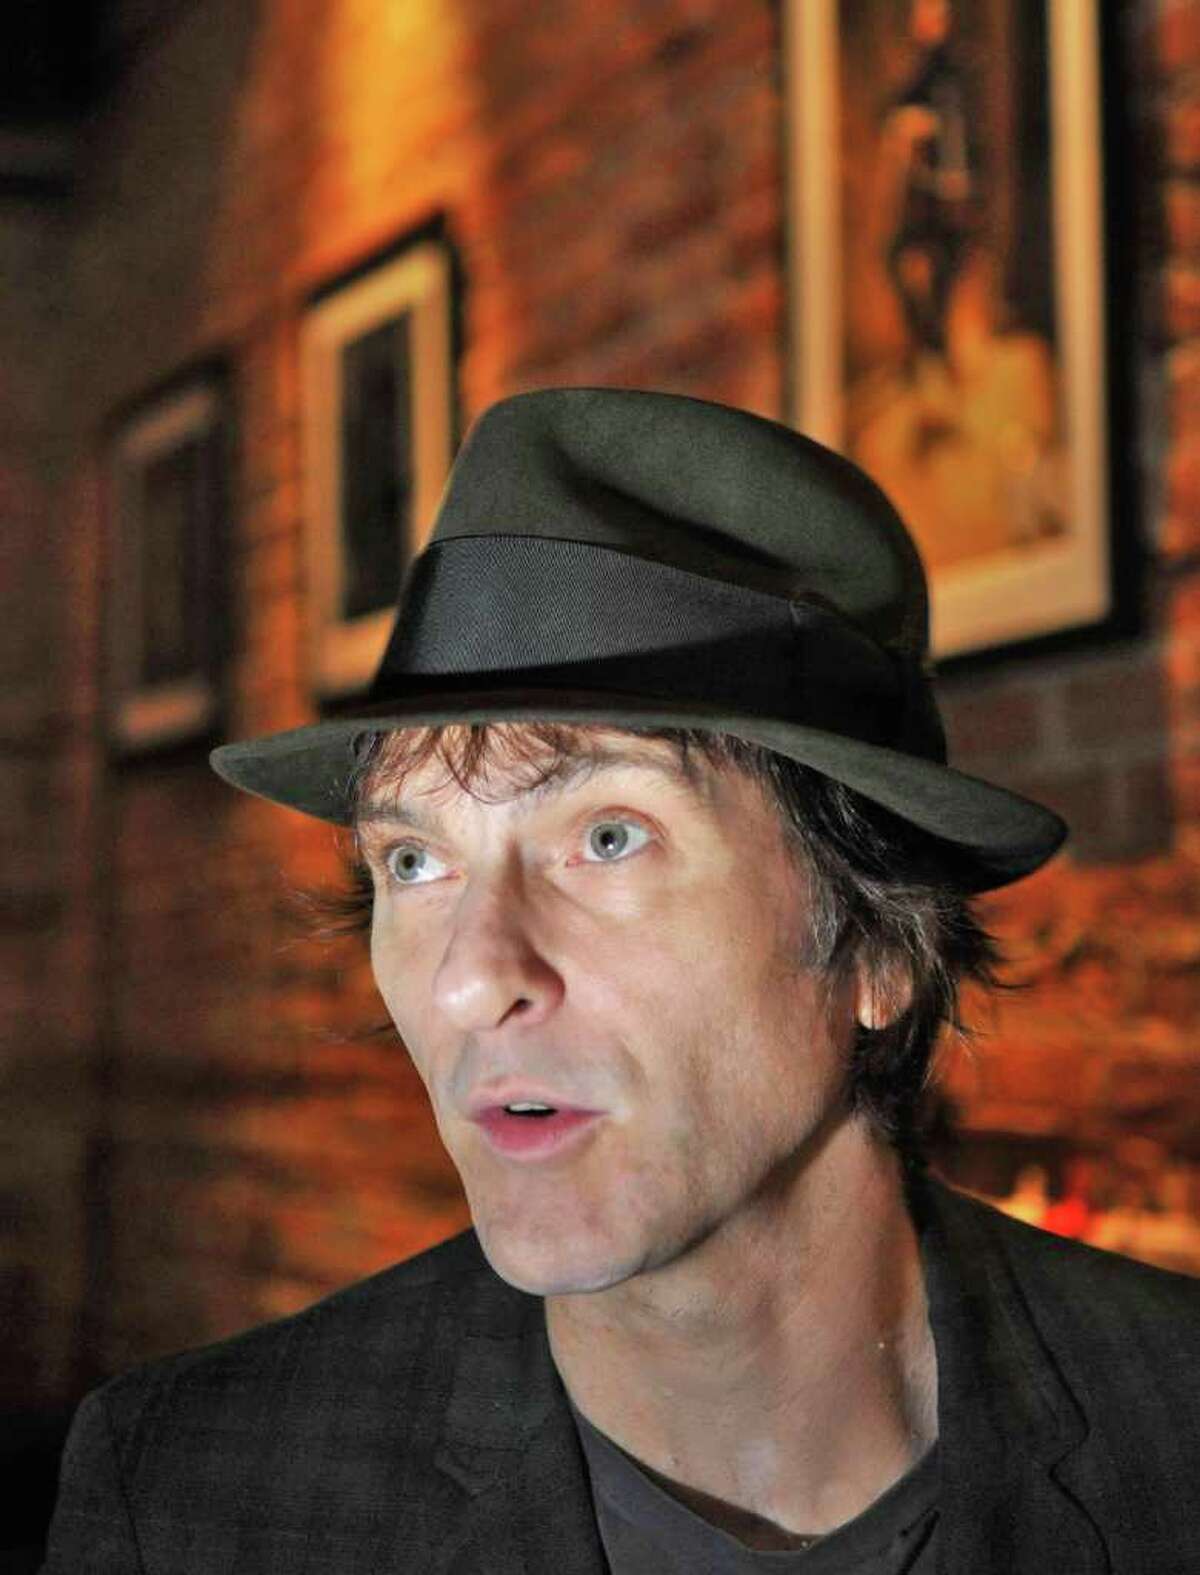 Tommy Stinson, a new resident of Hudson and former bassist in The Replacements, sits inside a Warren Street restaurant in Hudson in late September shortly before hitting the road on his latest assignment. Stinson is now playing with Guns n Roses on its worldwide tour. (John Carl D'Annibale / Times Union)